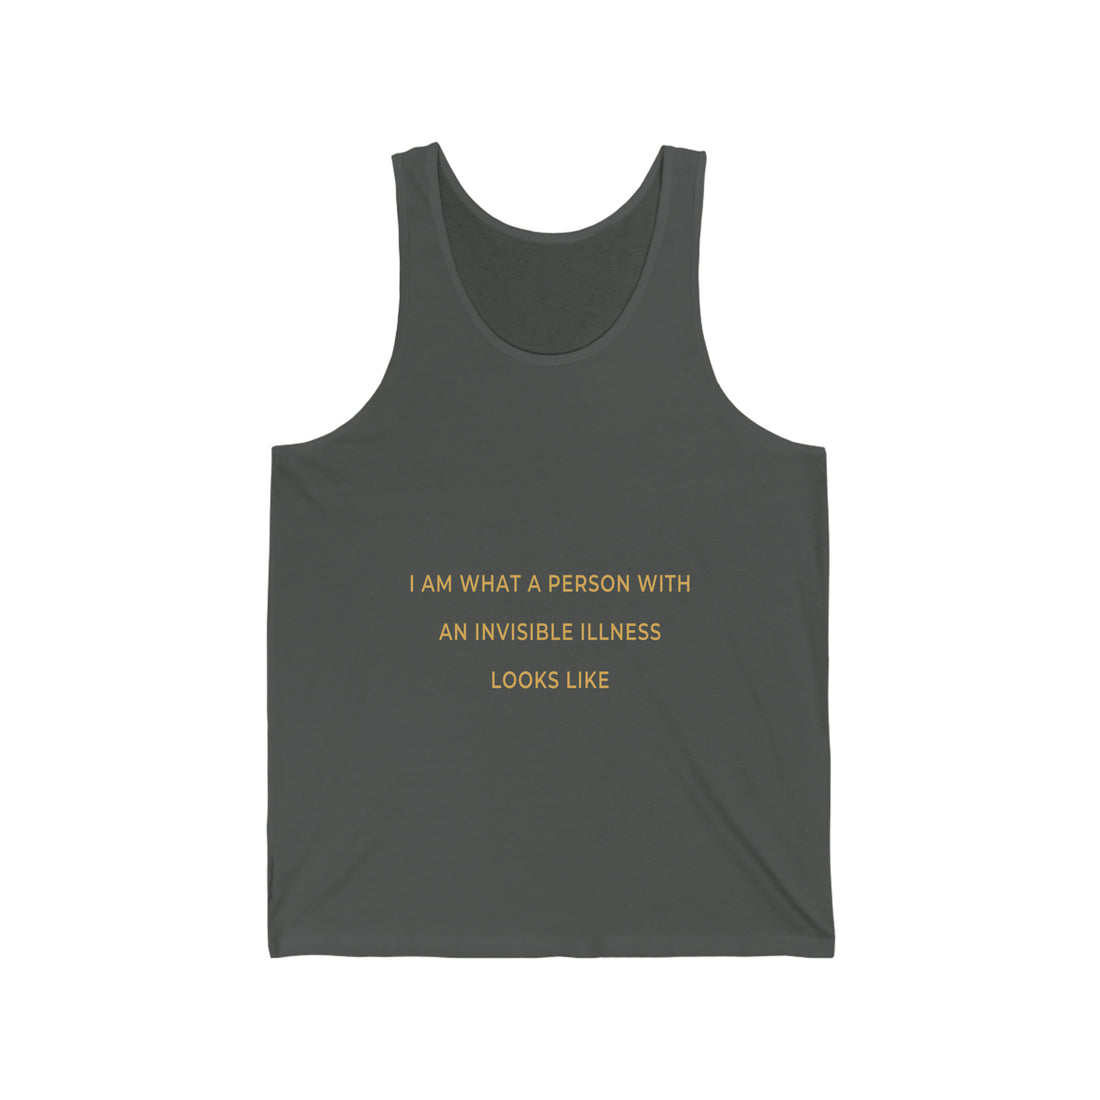 I Am What A Person With An Invisible Illness Looks Like - Unisex Jersey Tank Top